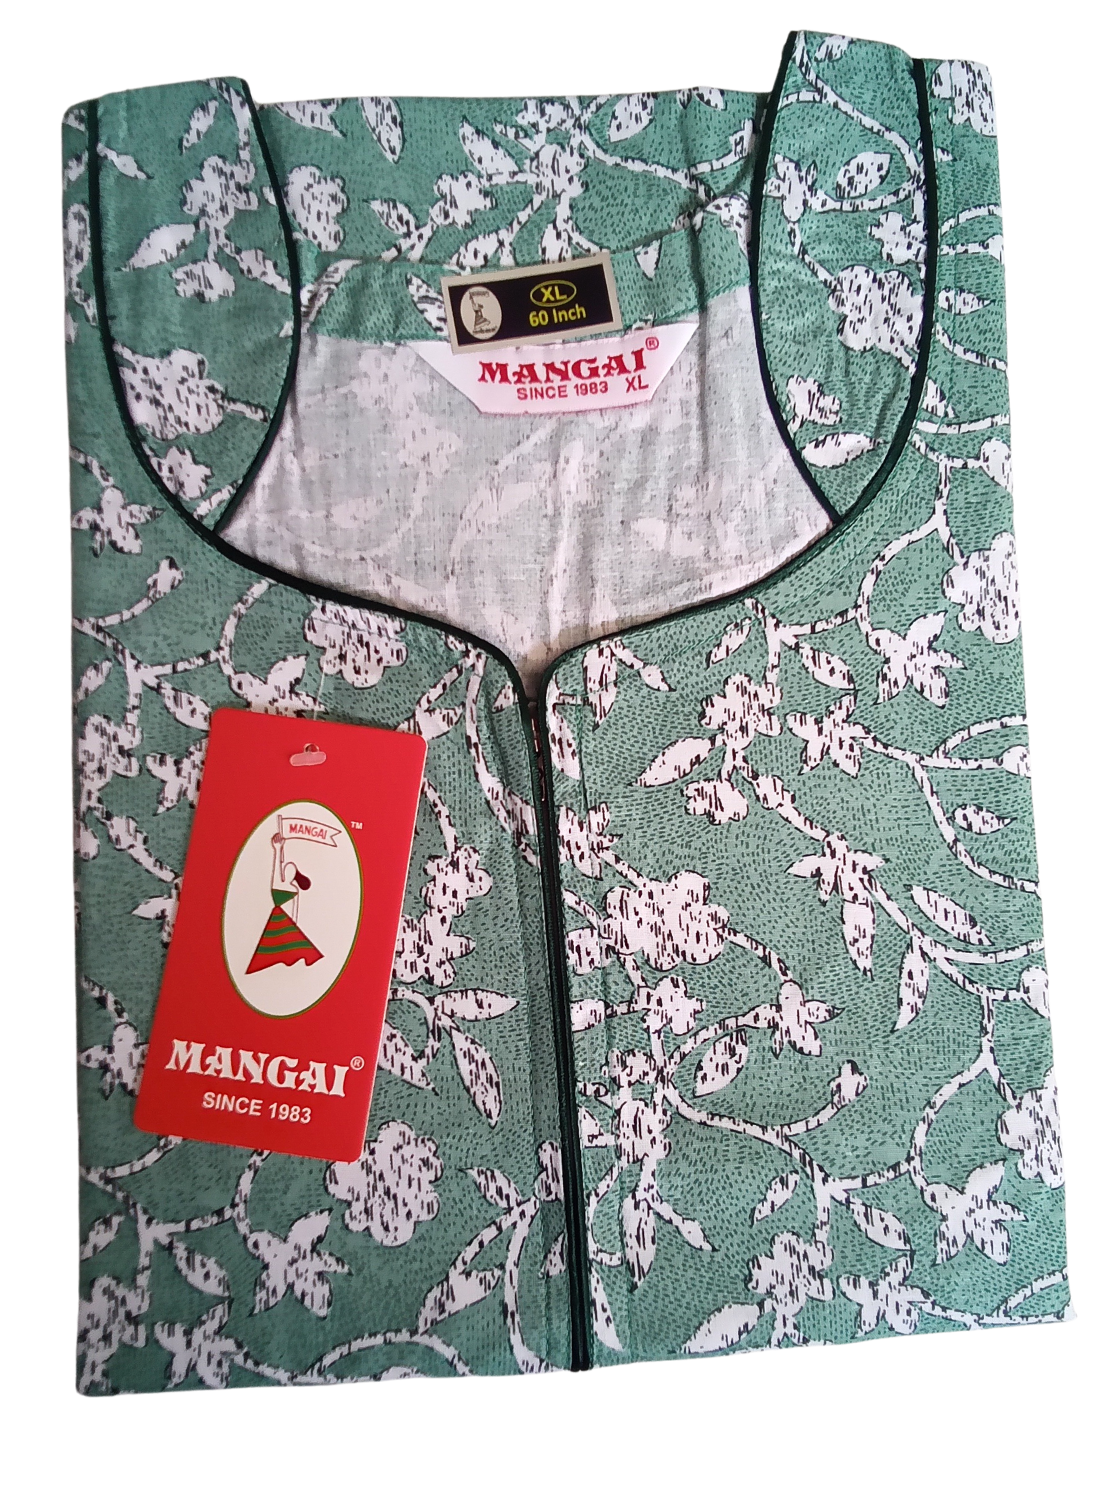 MANGAI New Arrivals Cotton 60Inch Nighties - Fancy Neck | With Side Pocket |Shrinkage Free Nighties | Stylish Collection's for Trendy Women's